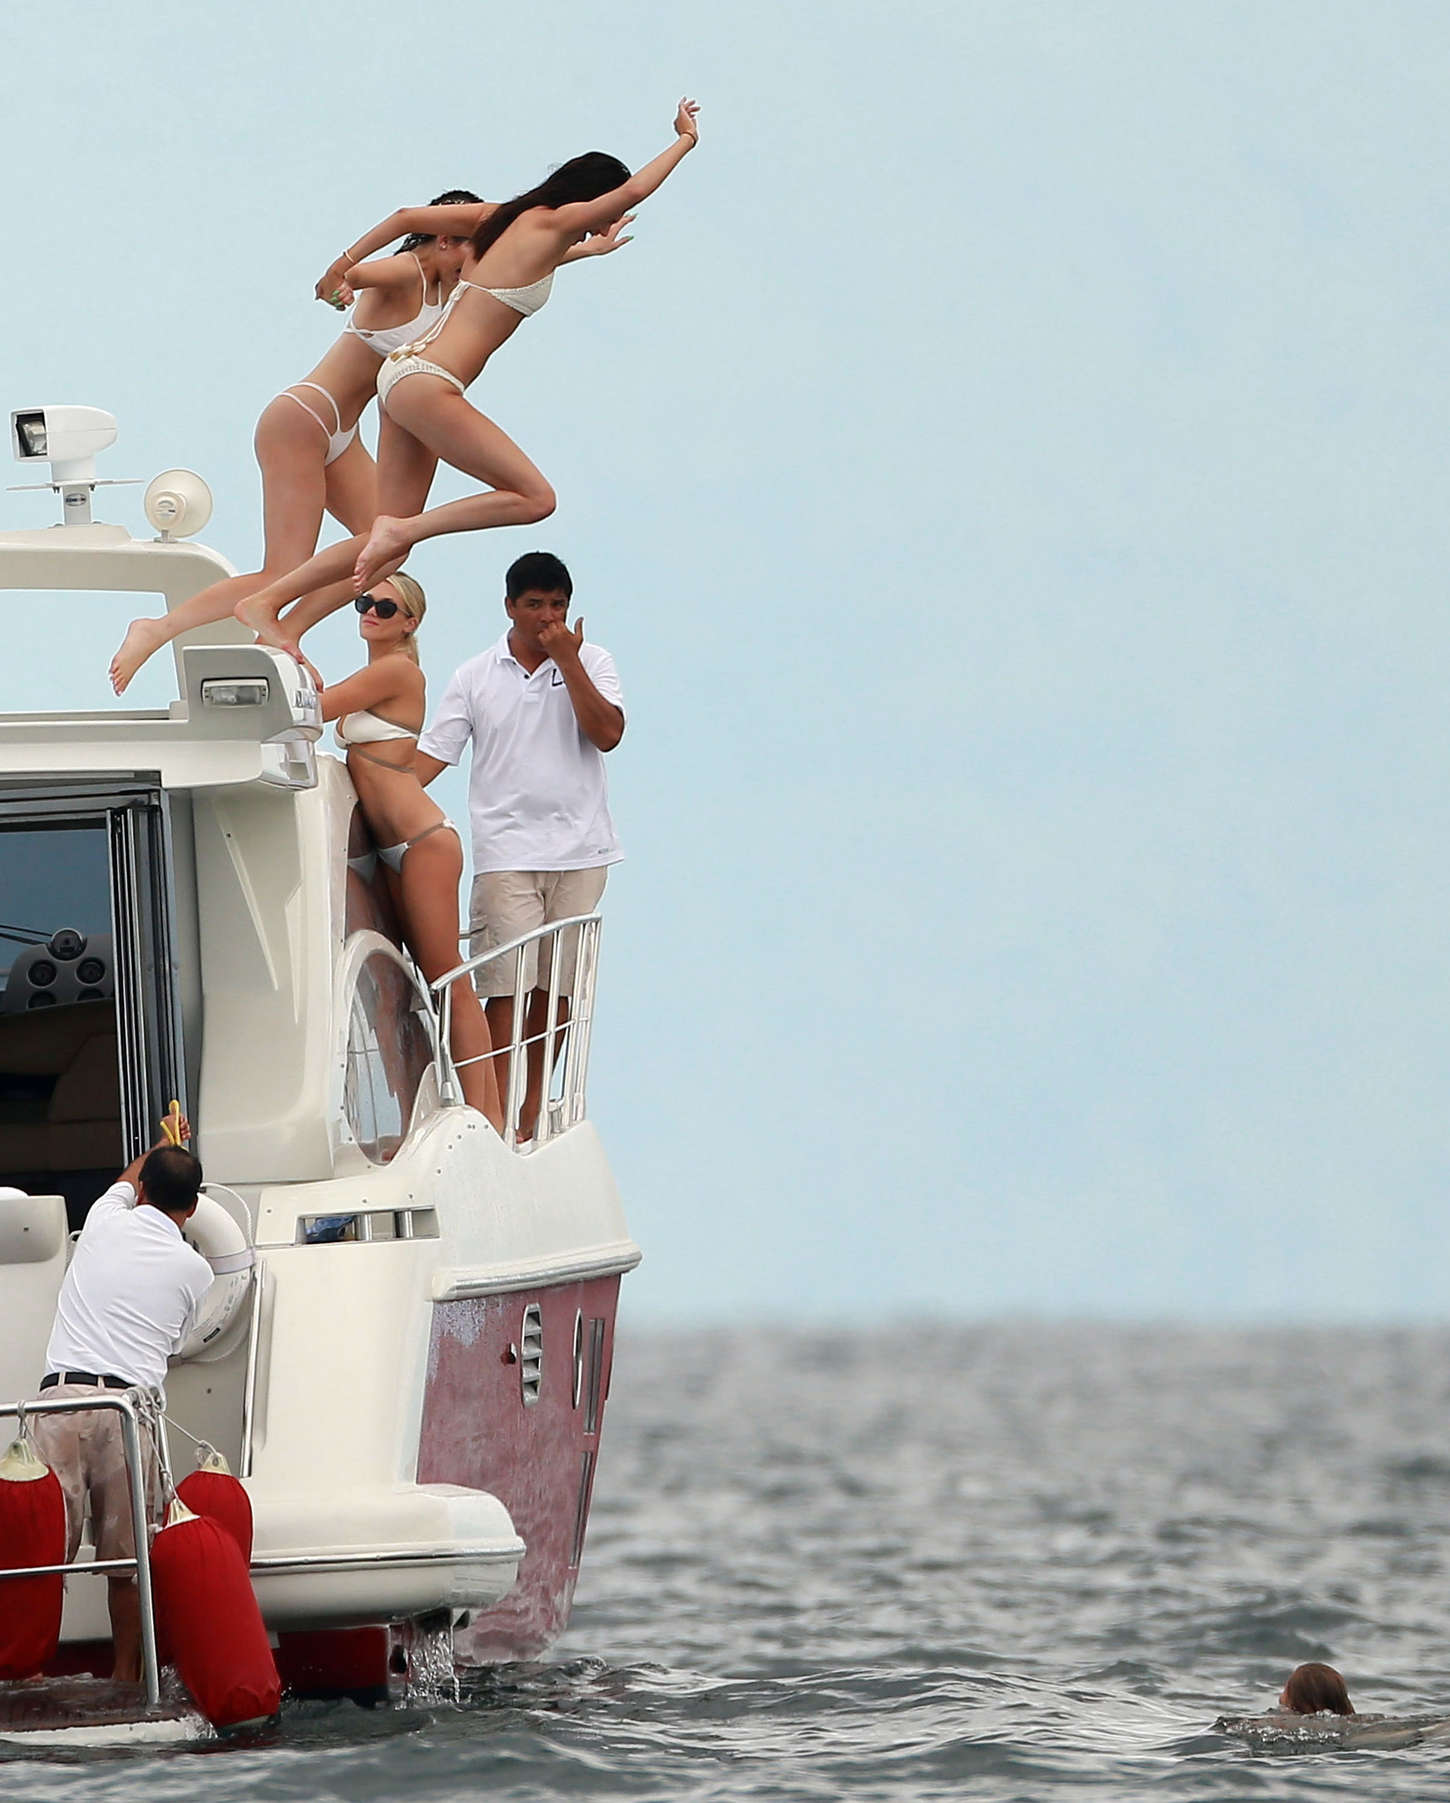 Kylie, Kendall Jenner and Hailey Baldwin: Bikini Candids at Yacht in Mexico-30 | GotCeleb1450 x 1803